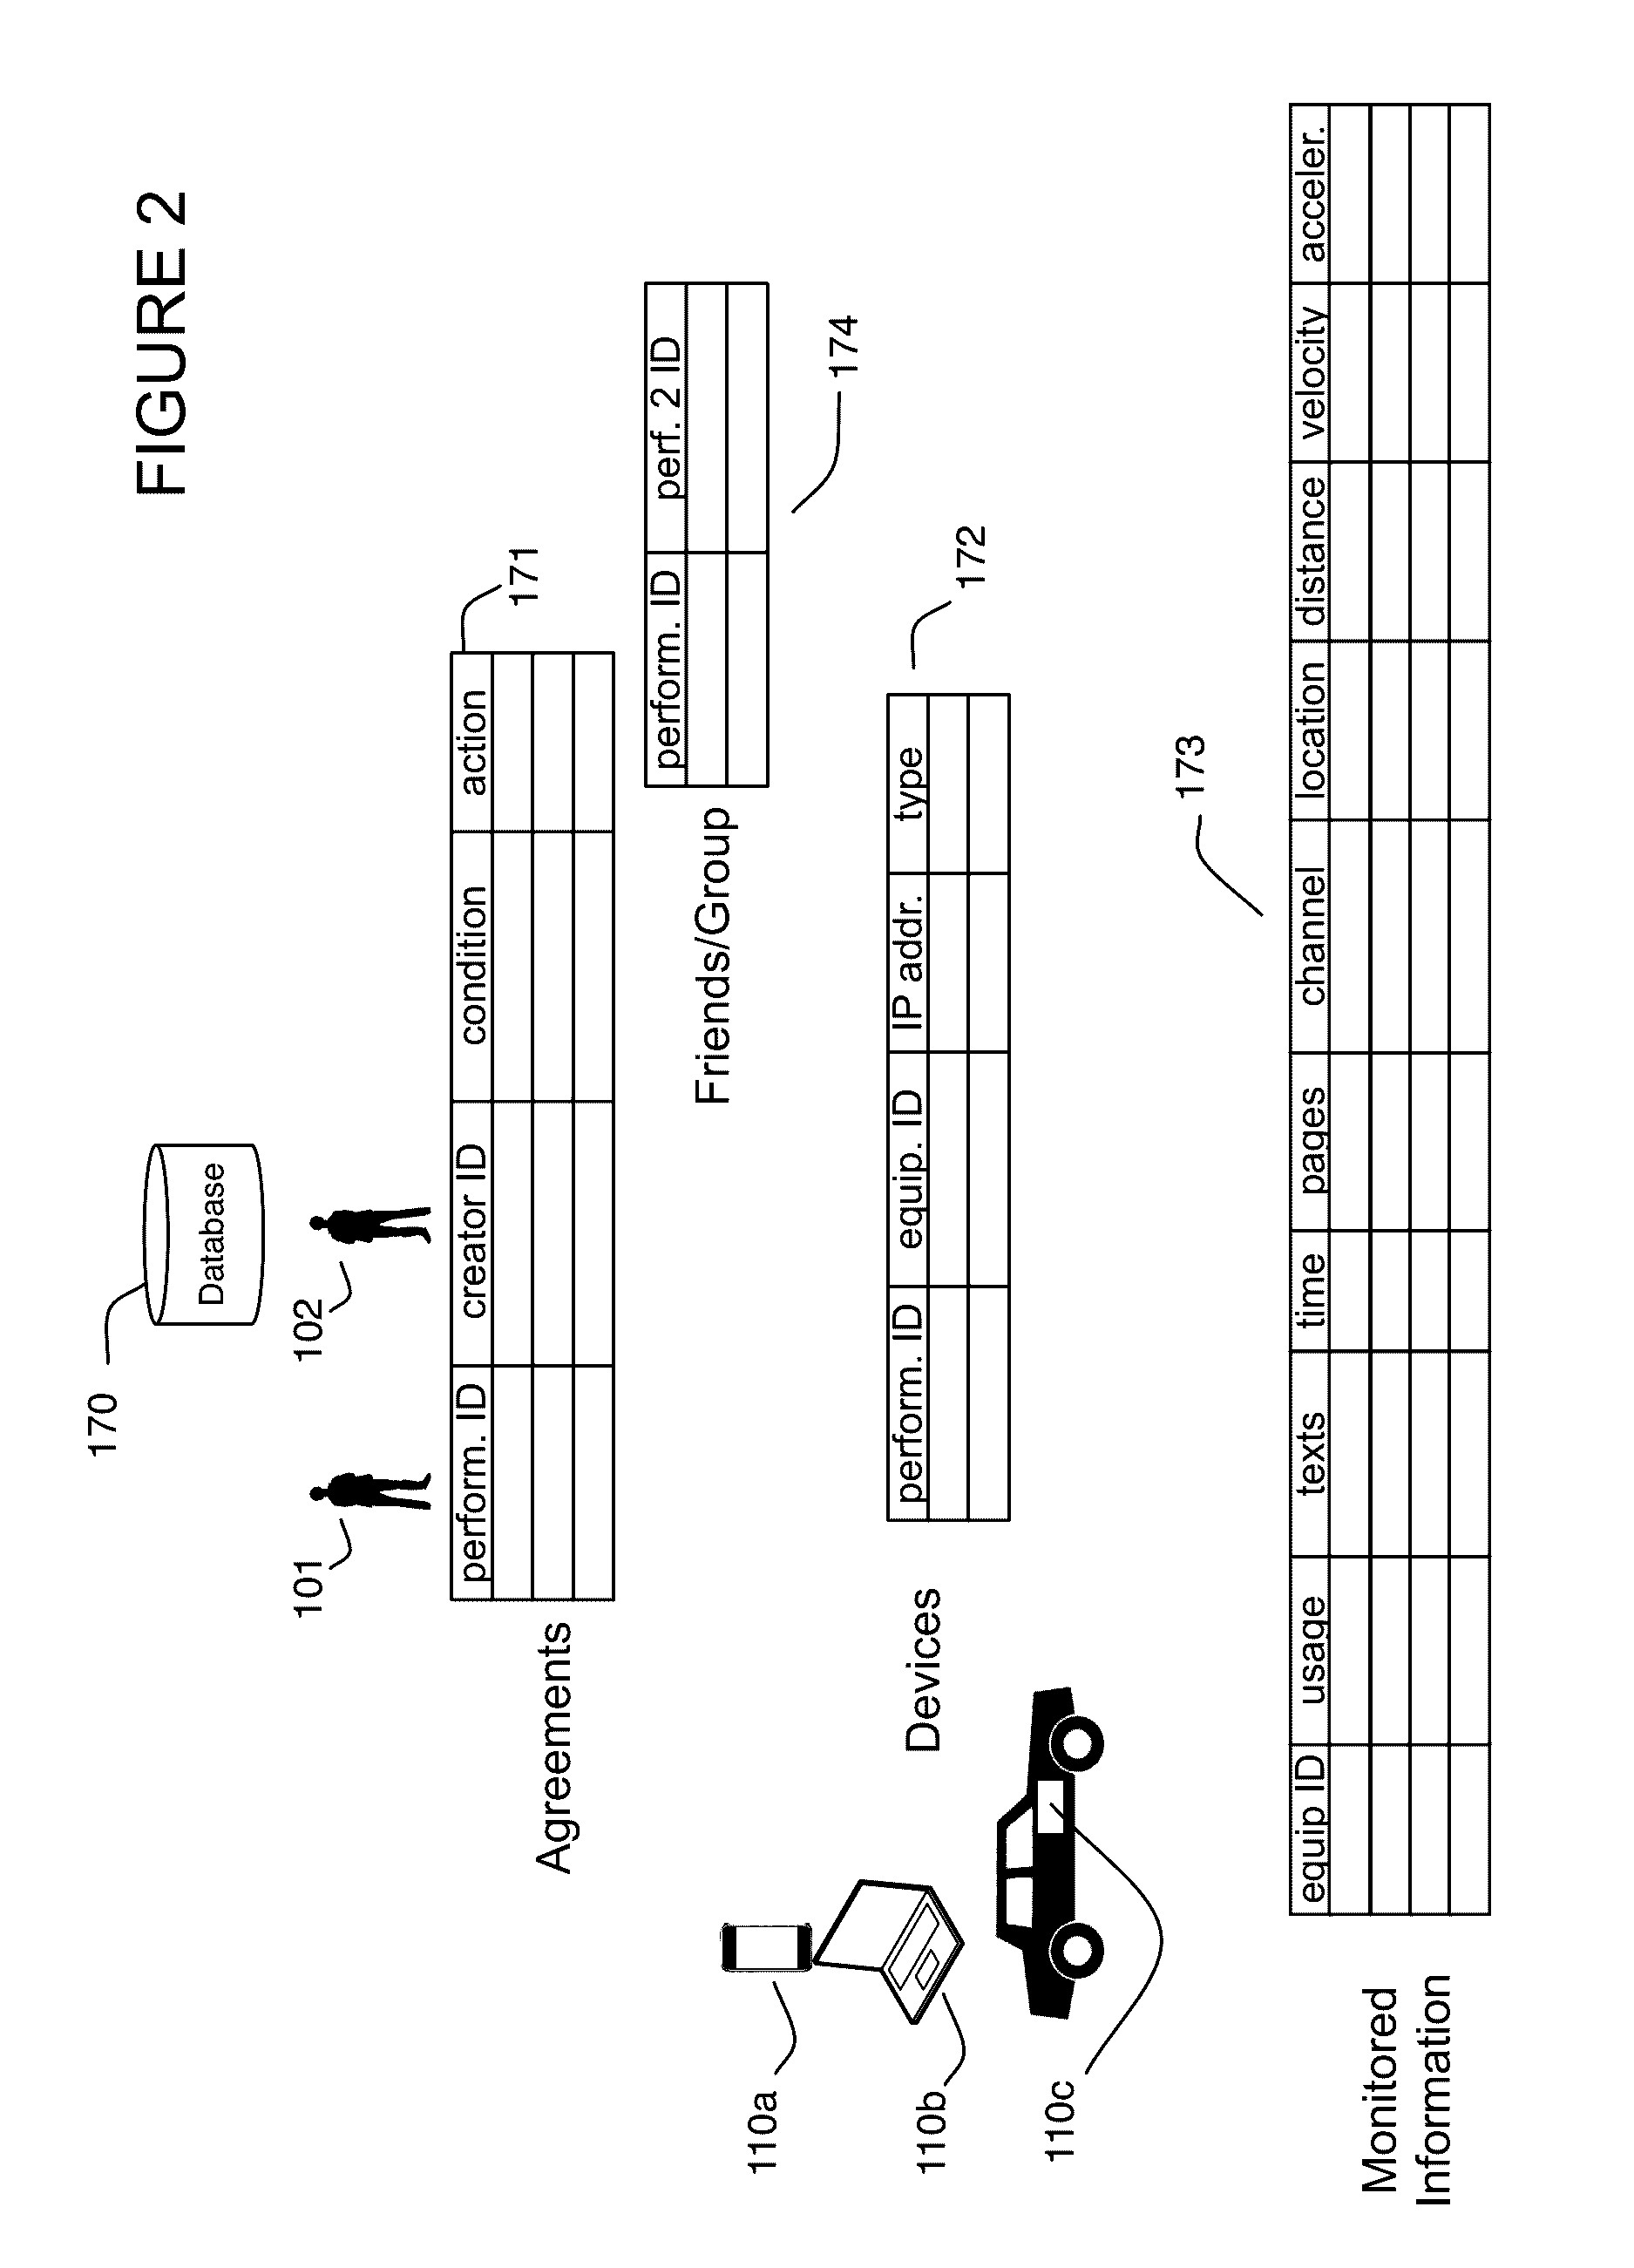 Information throttle based on compliance with electronic communication rules